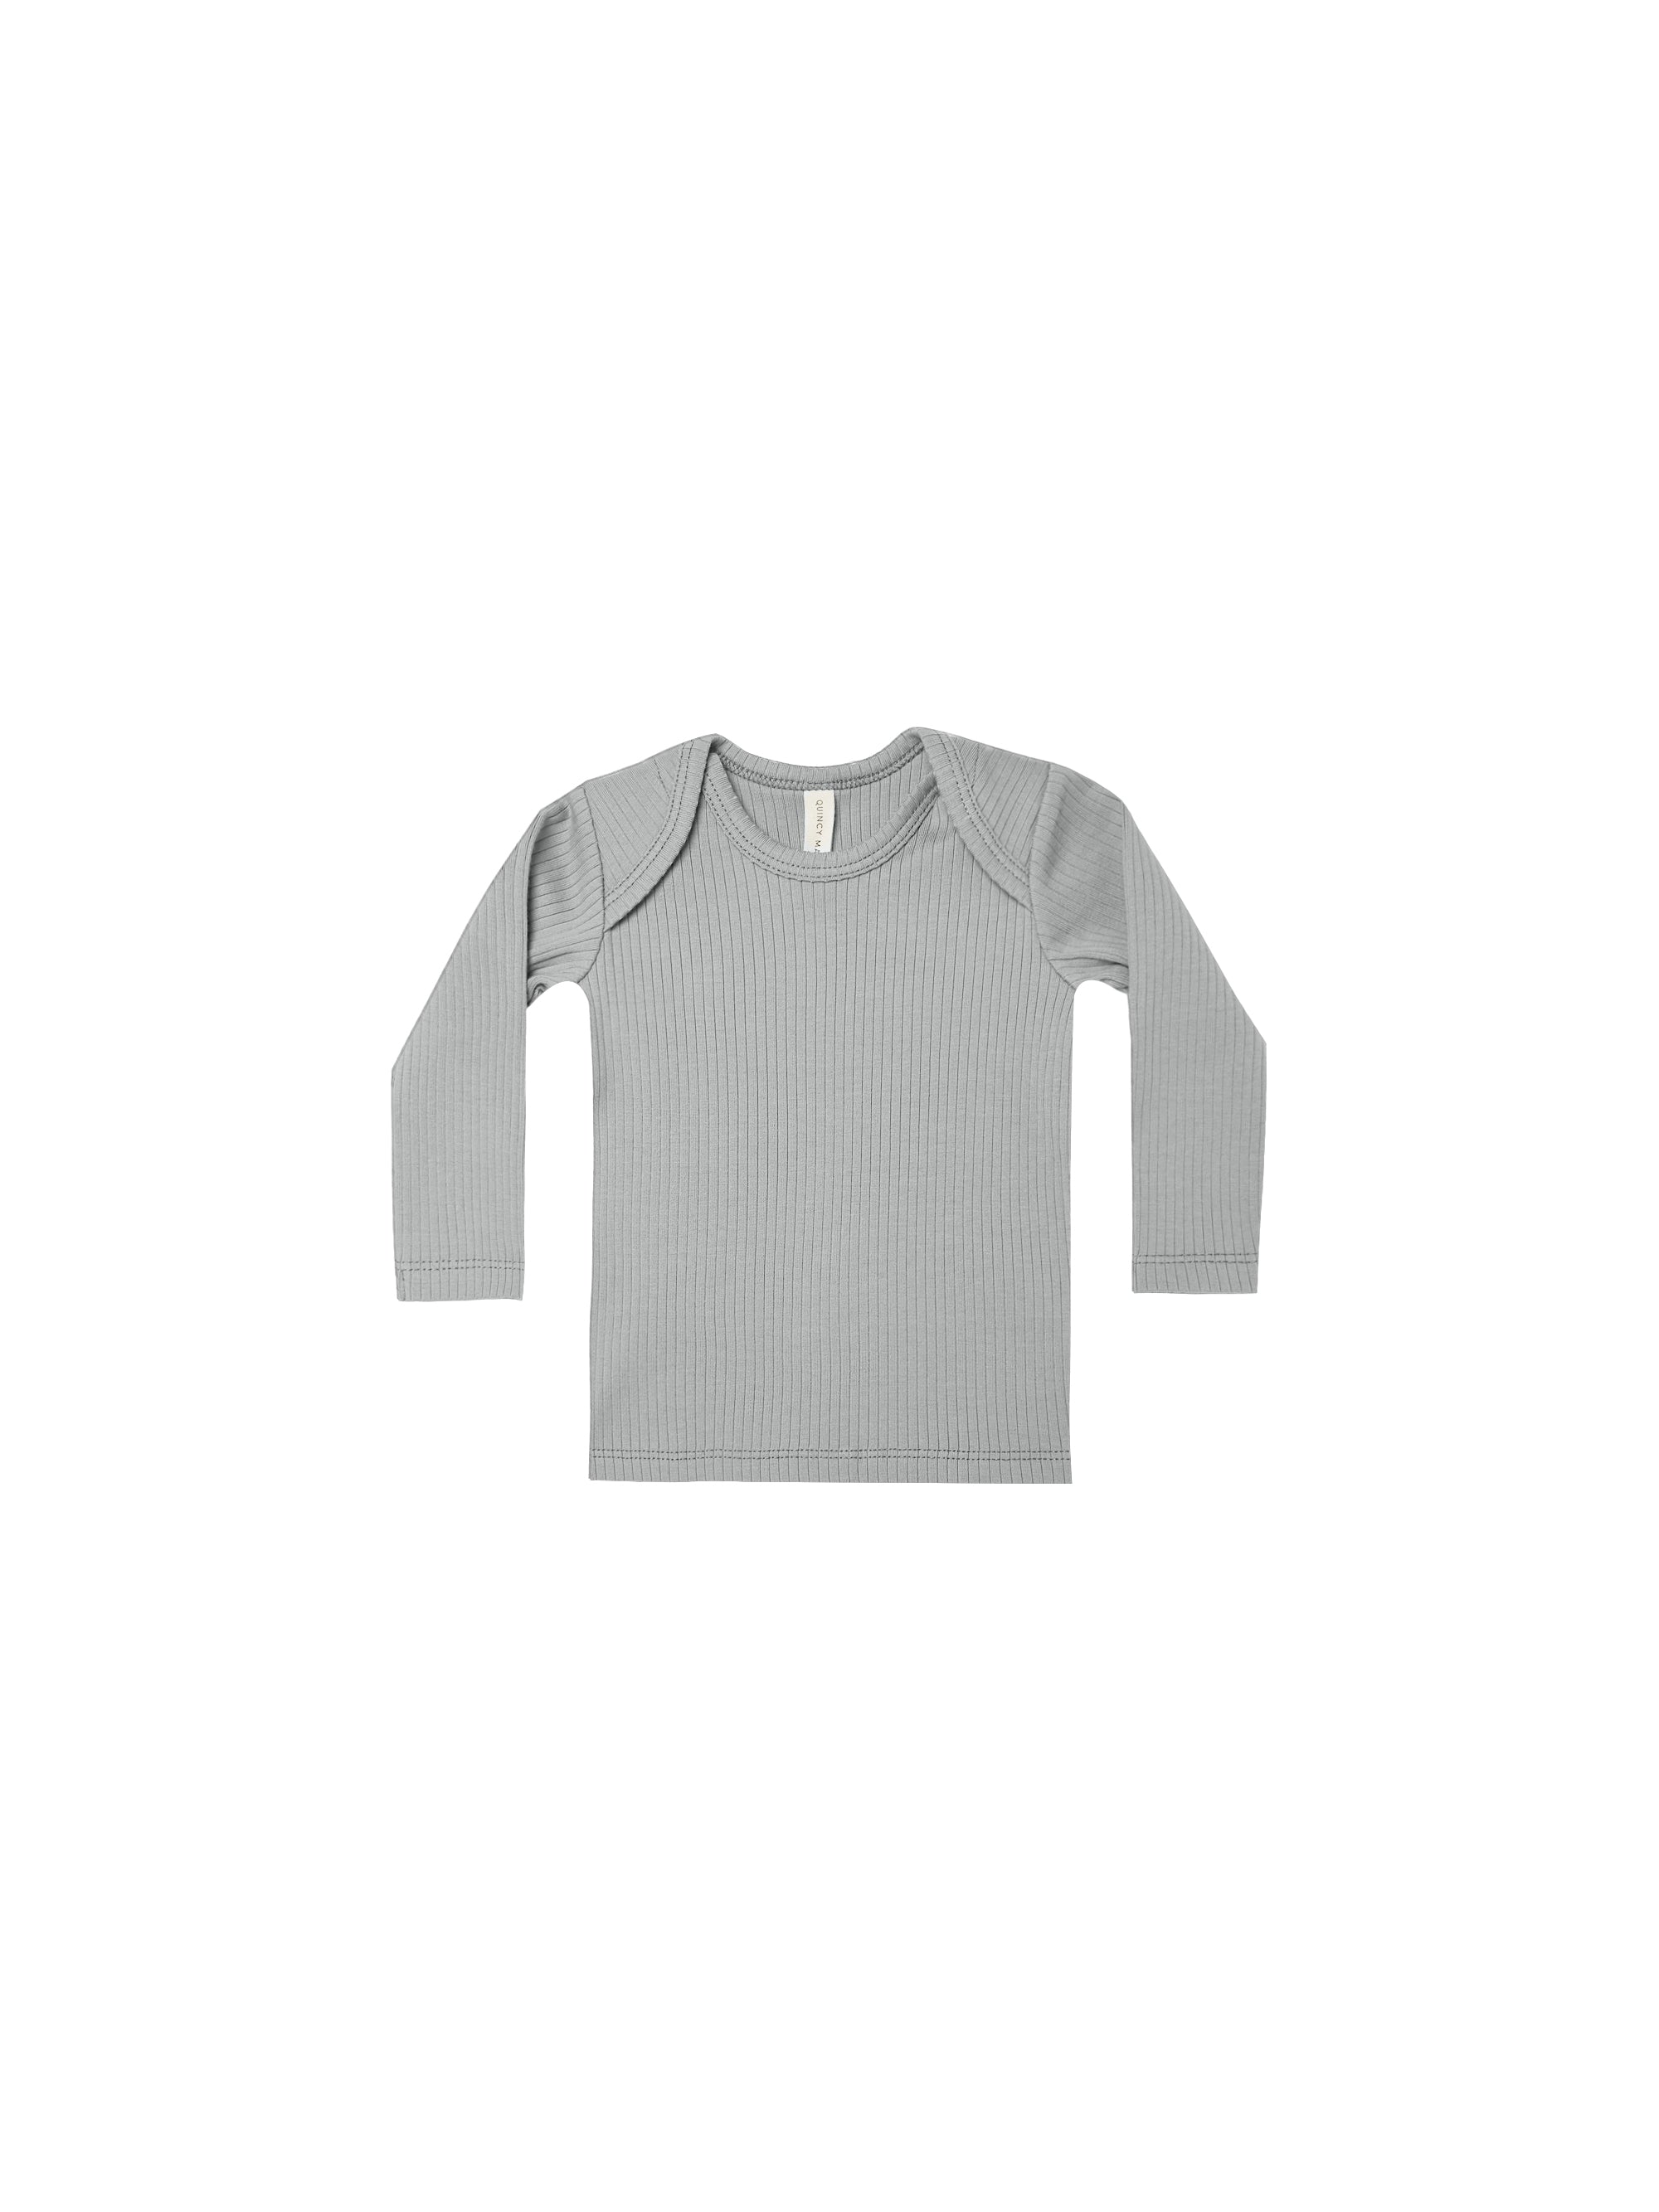 Quincy Mae Ribbed Lap Tee - Dusty Blue